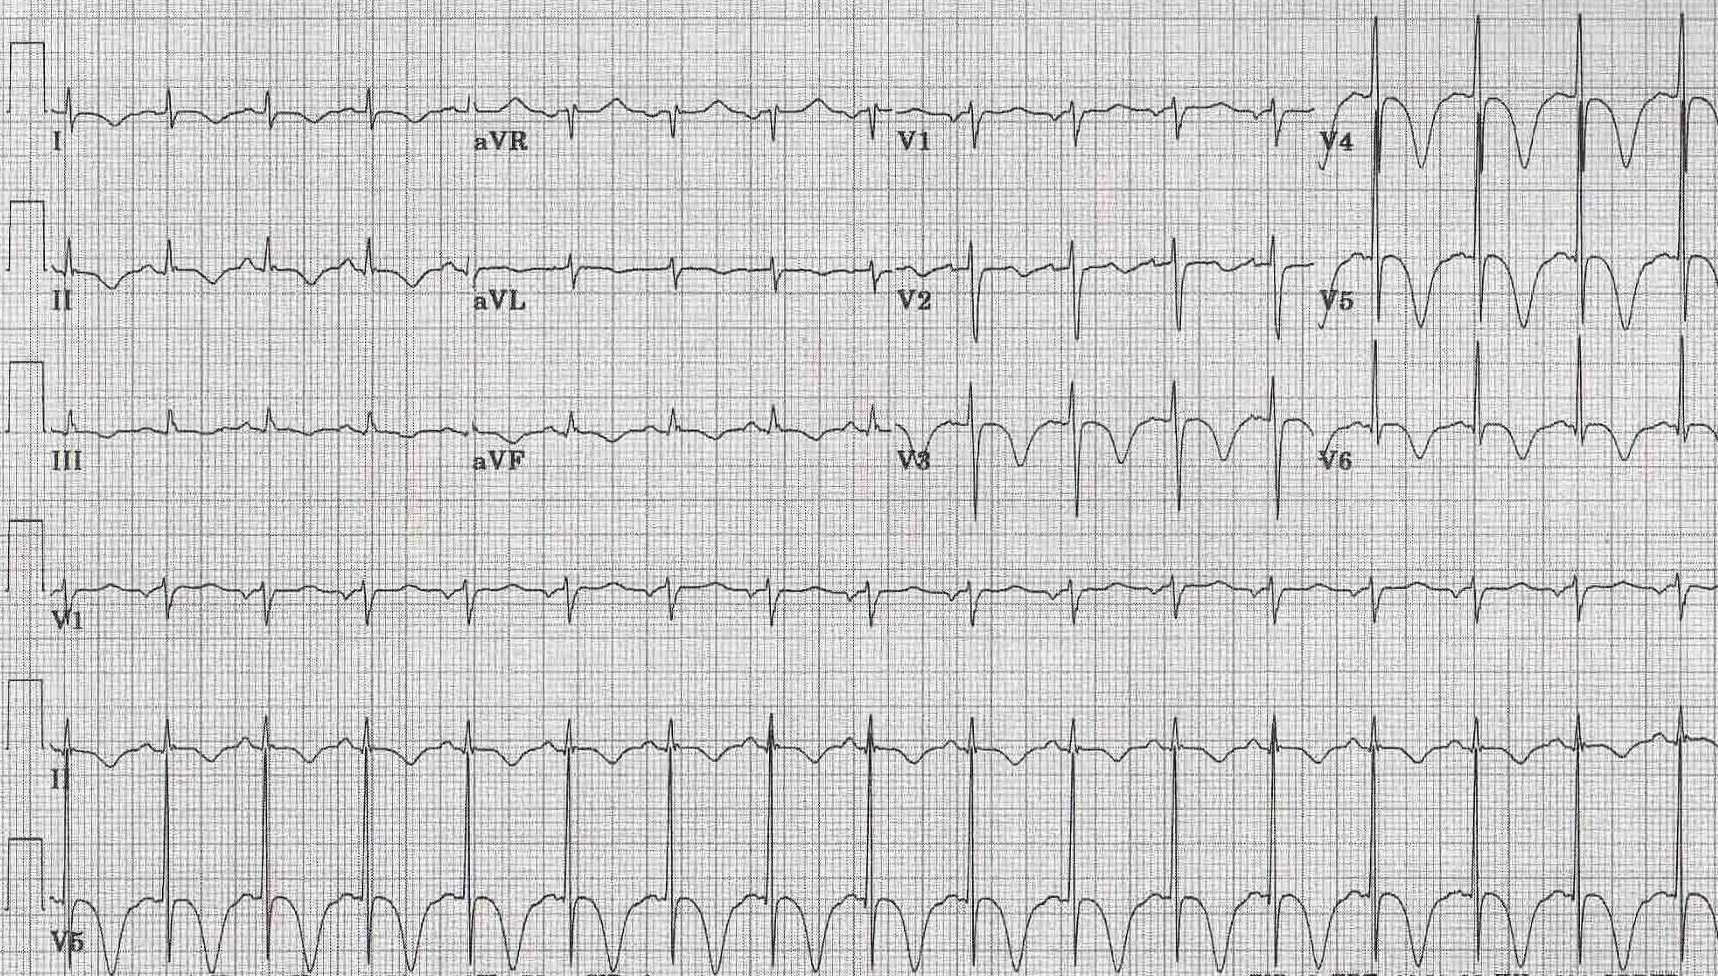 EKG of a patients with CNS Disorders